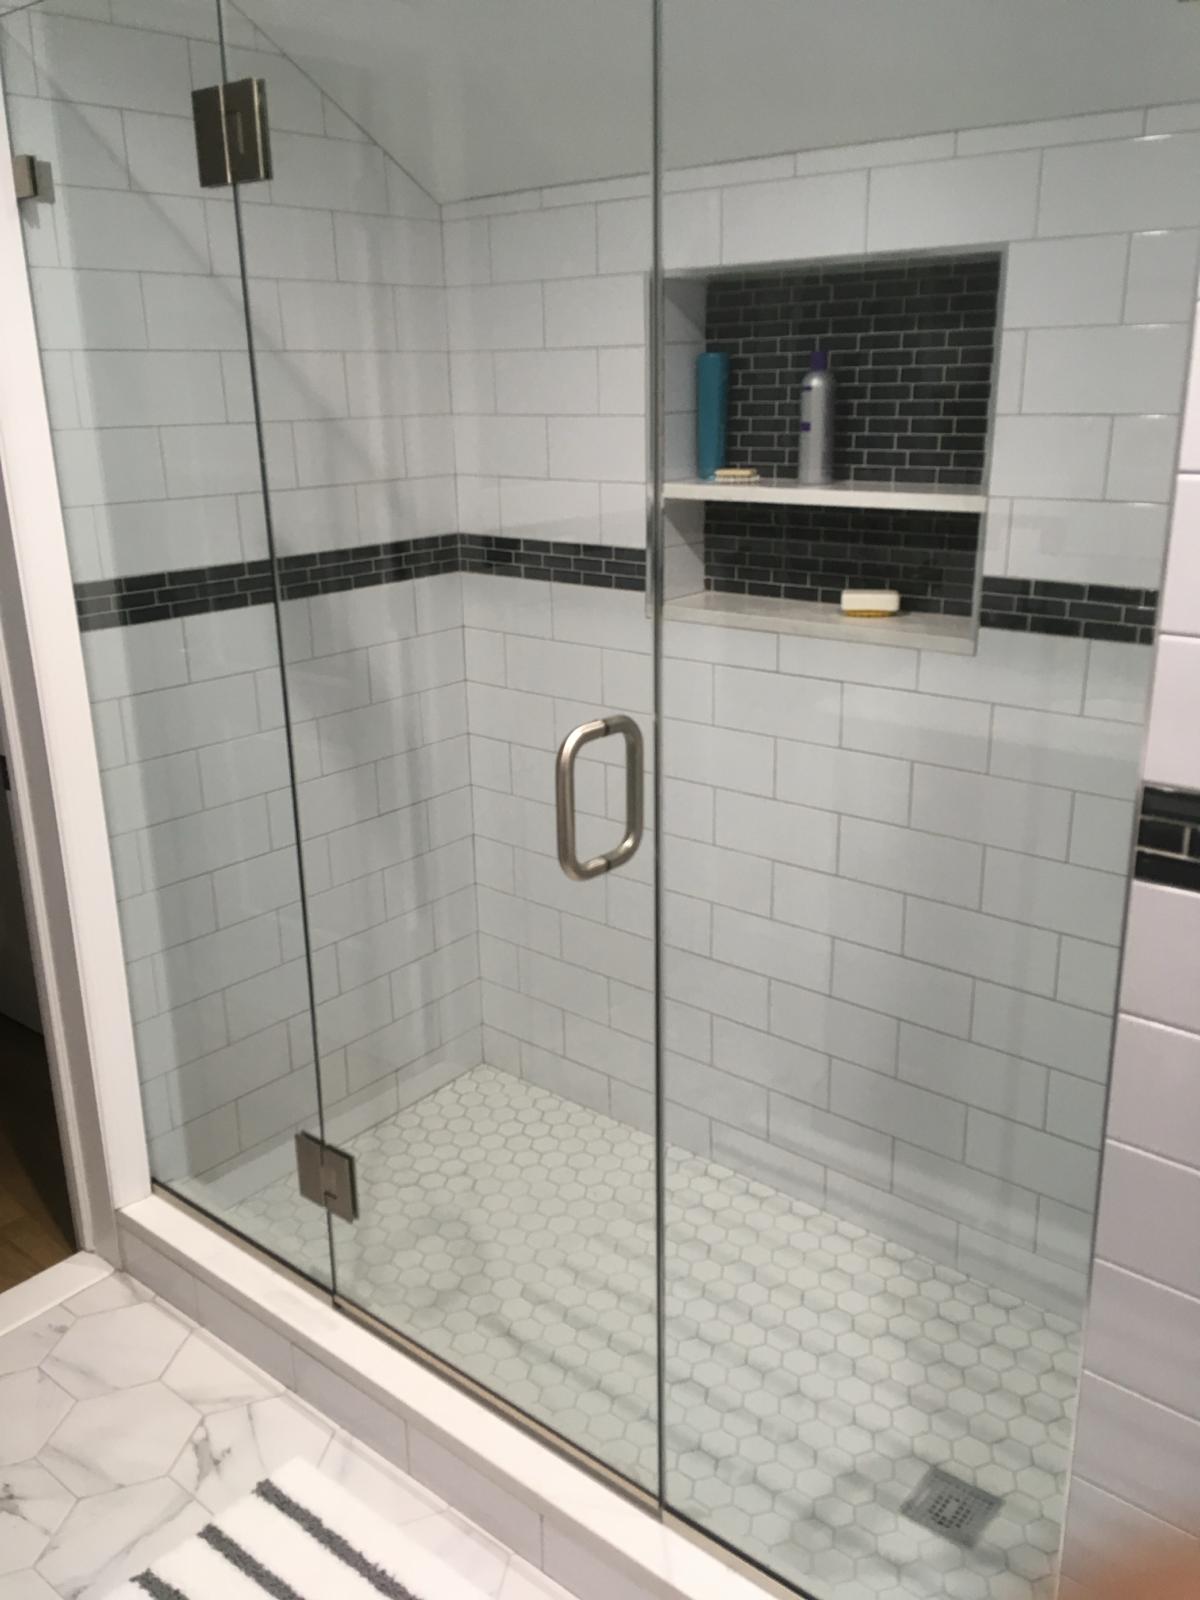 Refurbished bathroom with a newly installed sliding glass shower door.